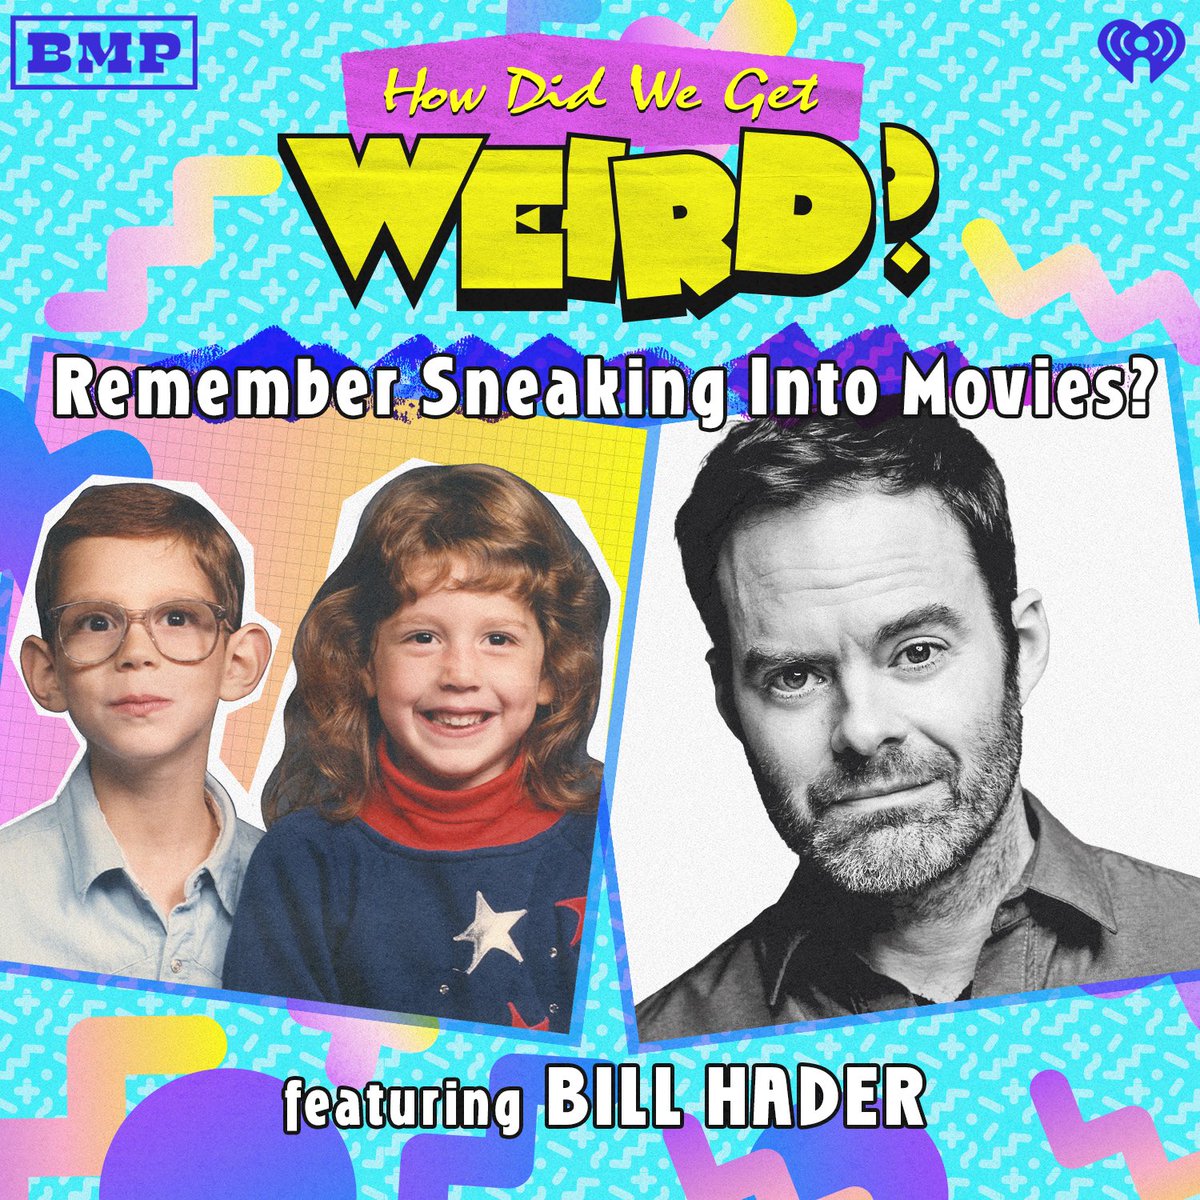 On today’s new ep @jonahmbayer and I are thrilled to welcome our friend Bill Hader! We’re talking about the time the 3 of us went to Europe together, Bill constantly making fun of me at SNL read throughs, sneaking into movies as kids and the unexpected consequences and much more!